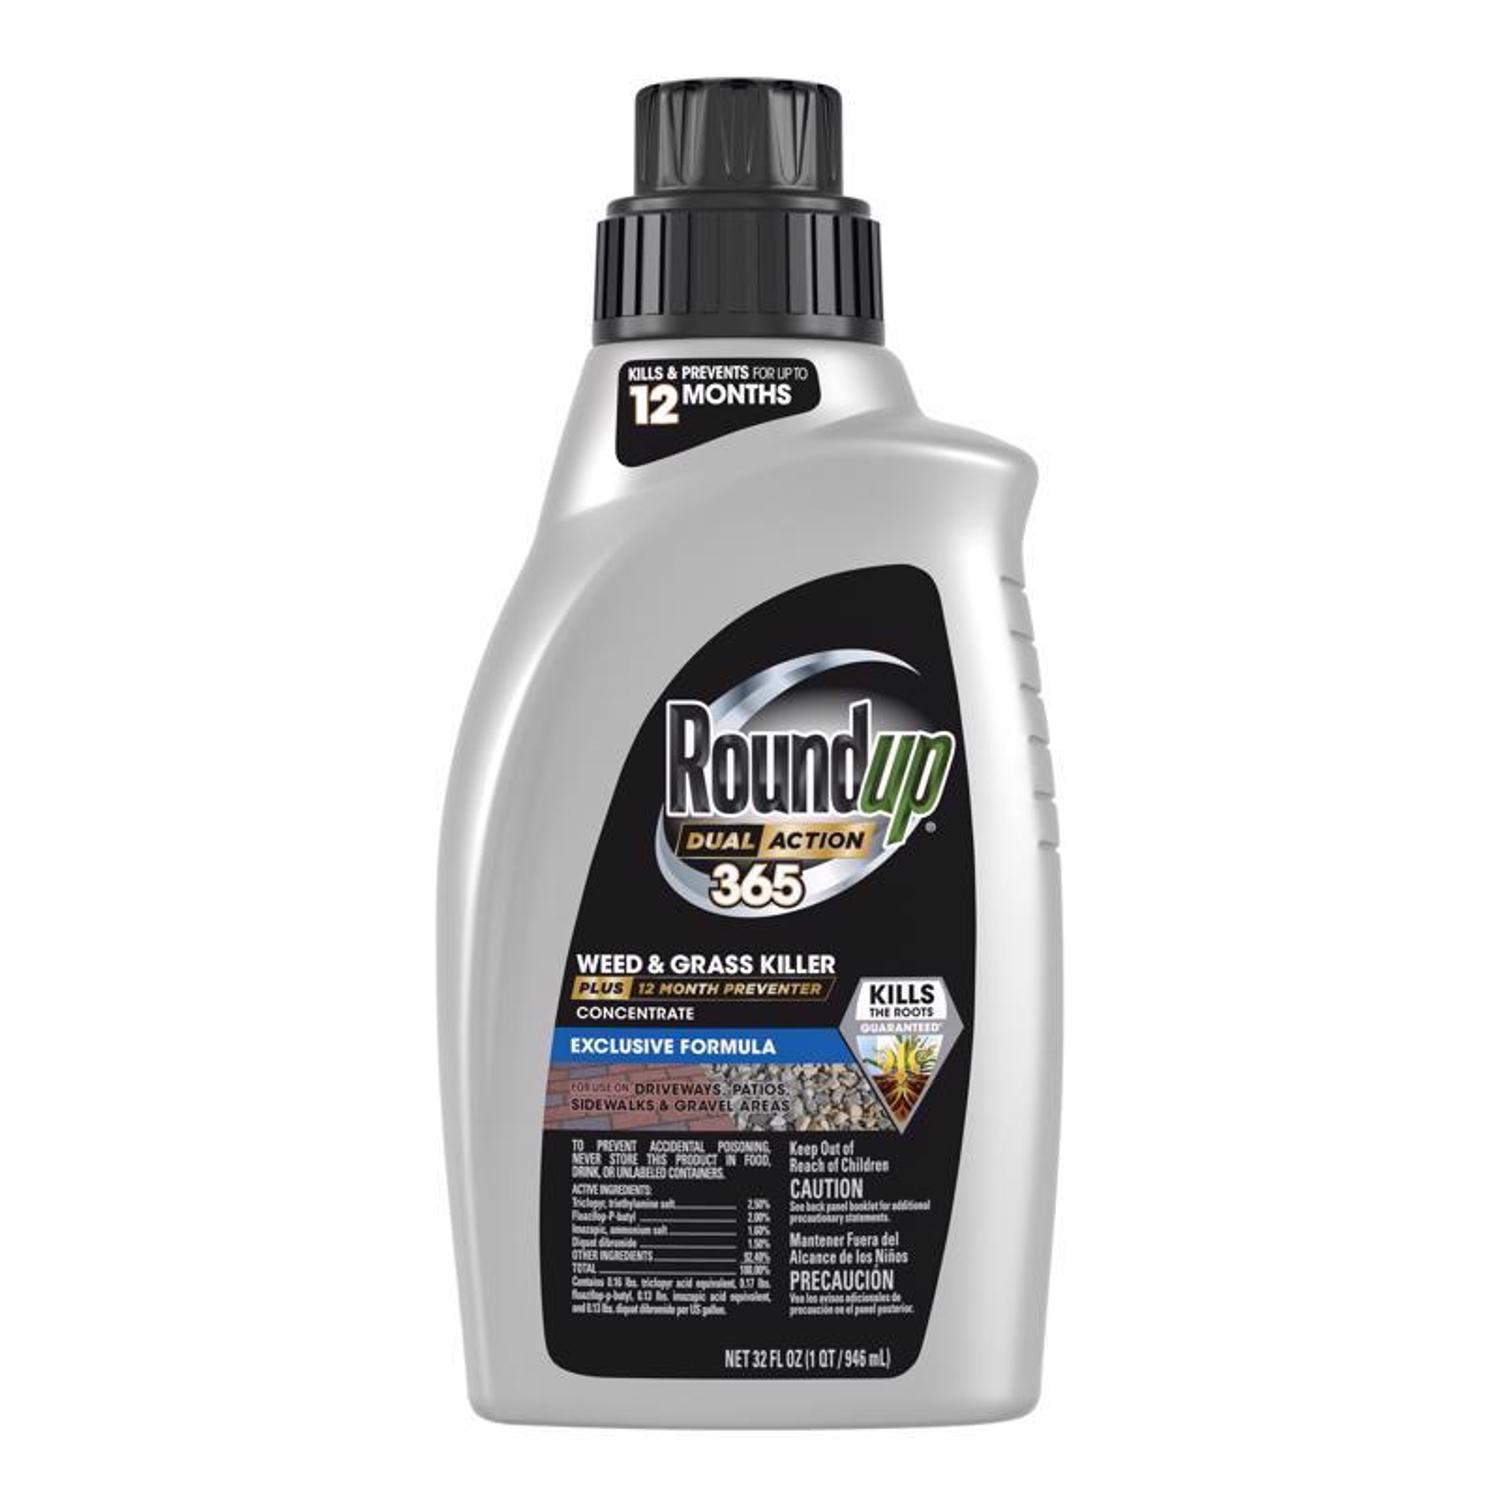 Photos - Lawn Mower Accessory Roundup Weed and Grass Killer Concentrate 32 oz 5378106